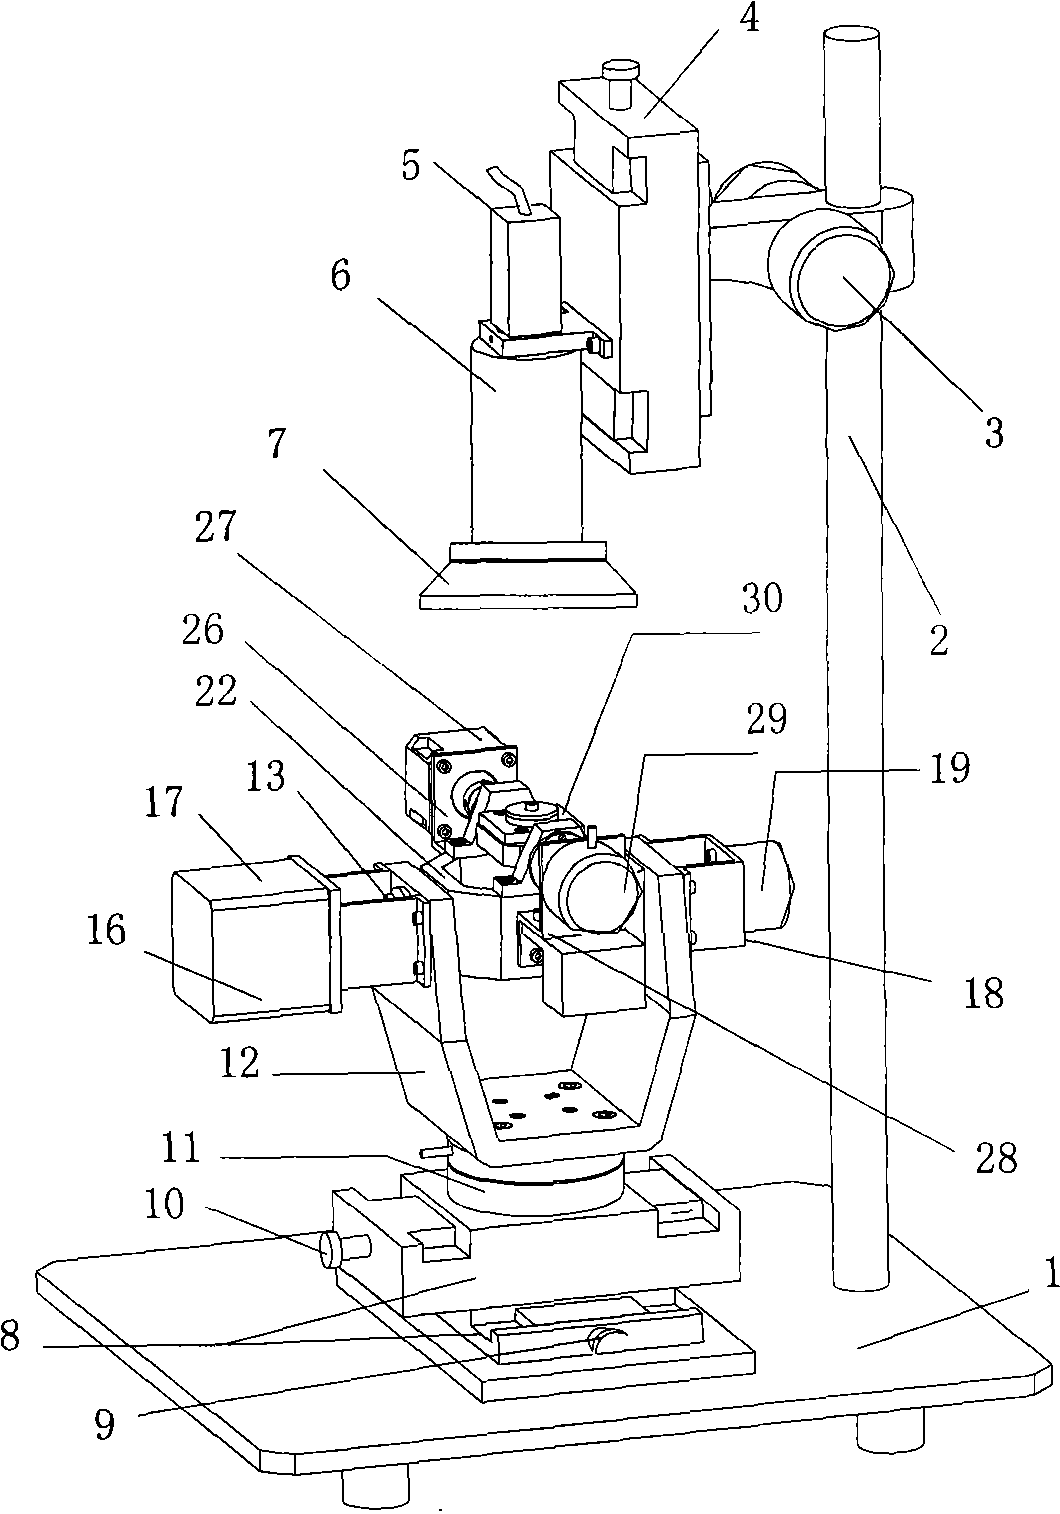 Surface flaw detection device